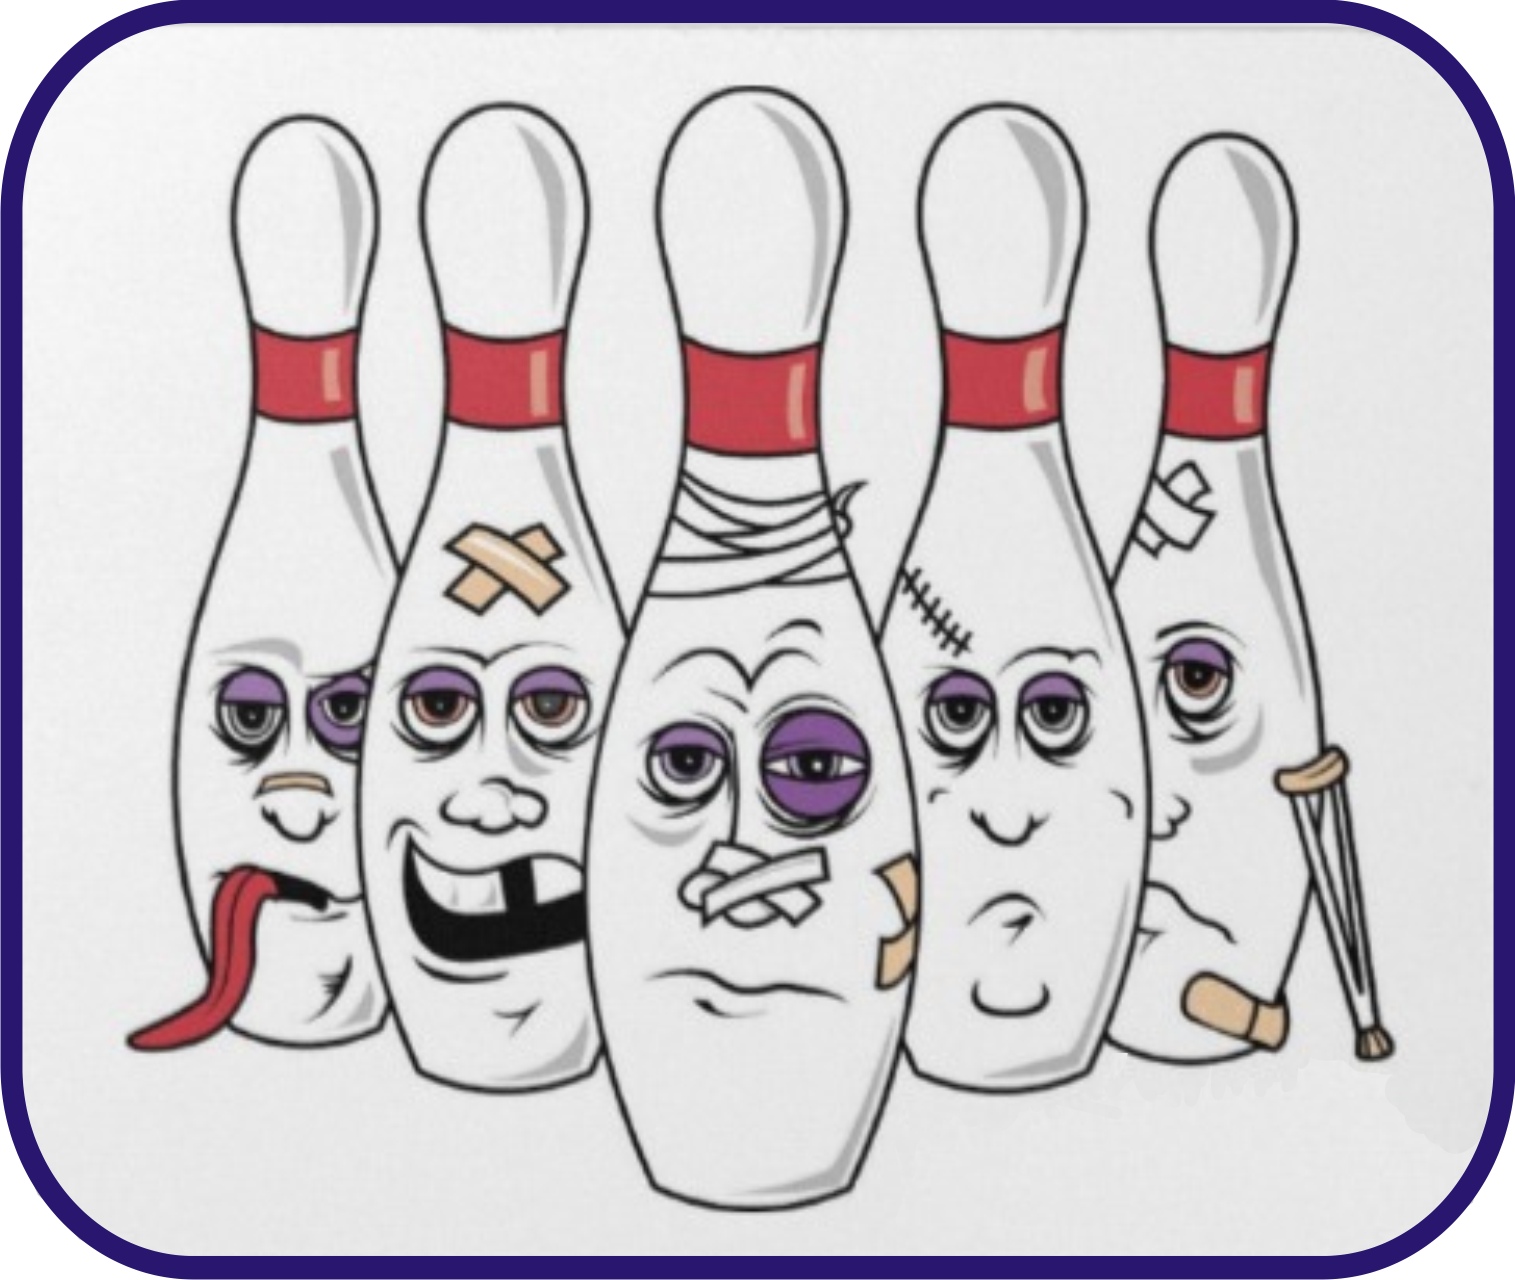 Picture of a bowling pin